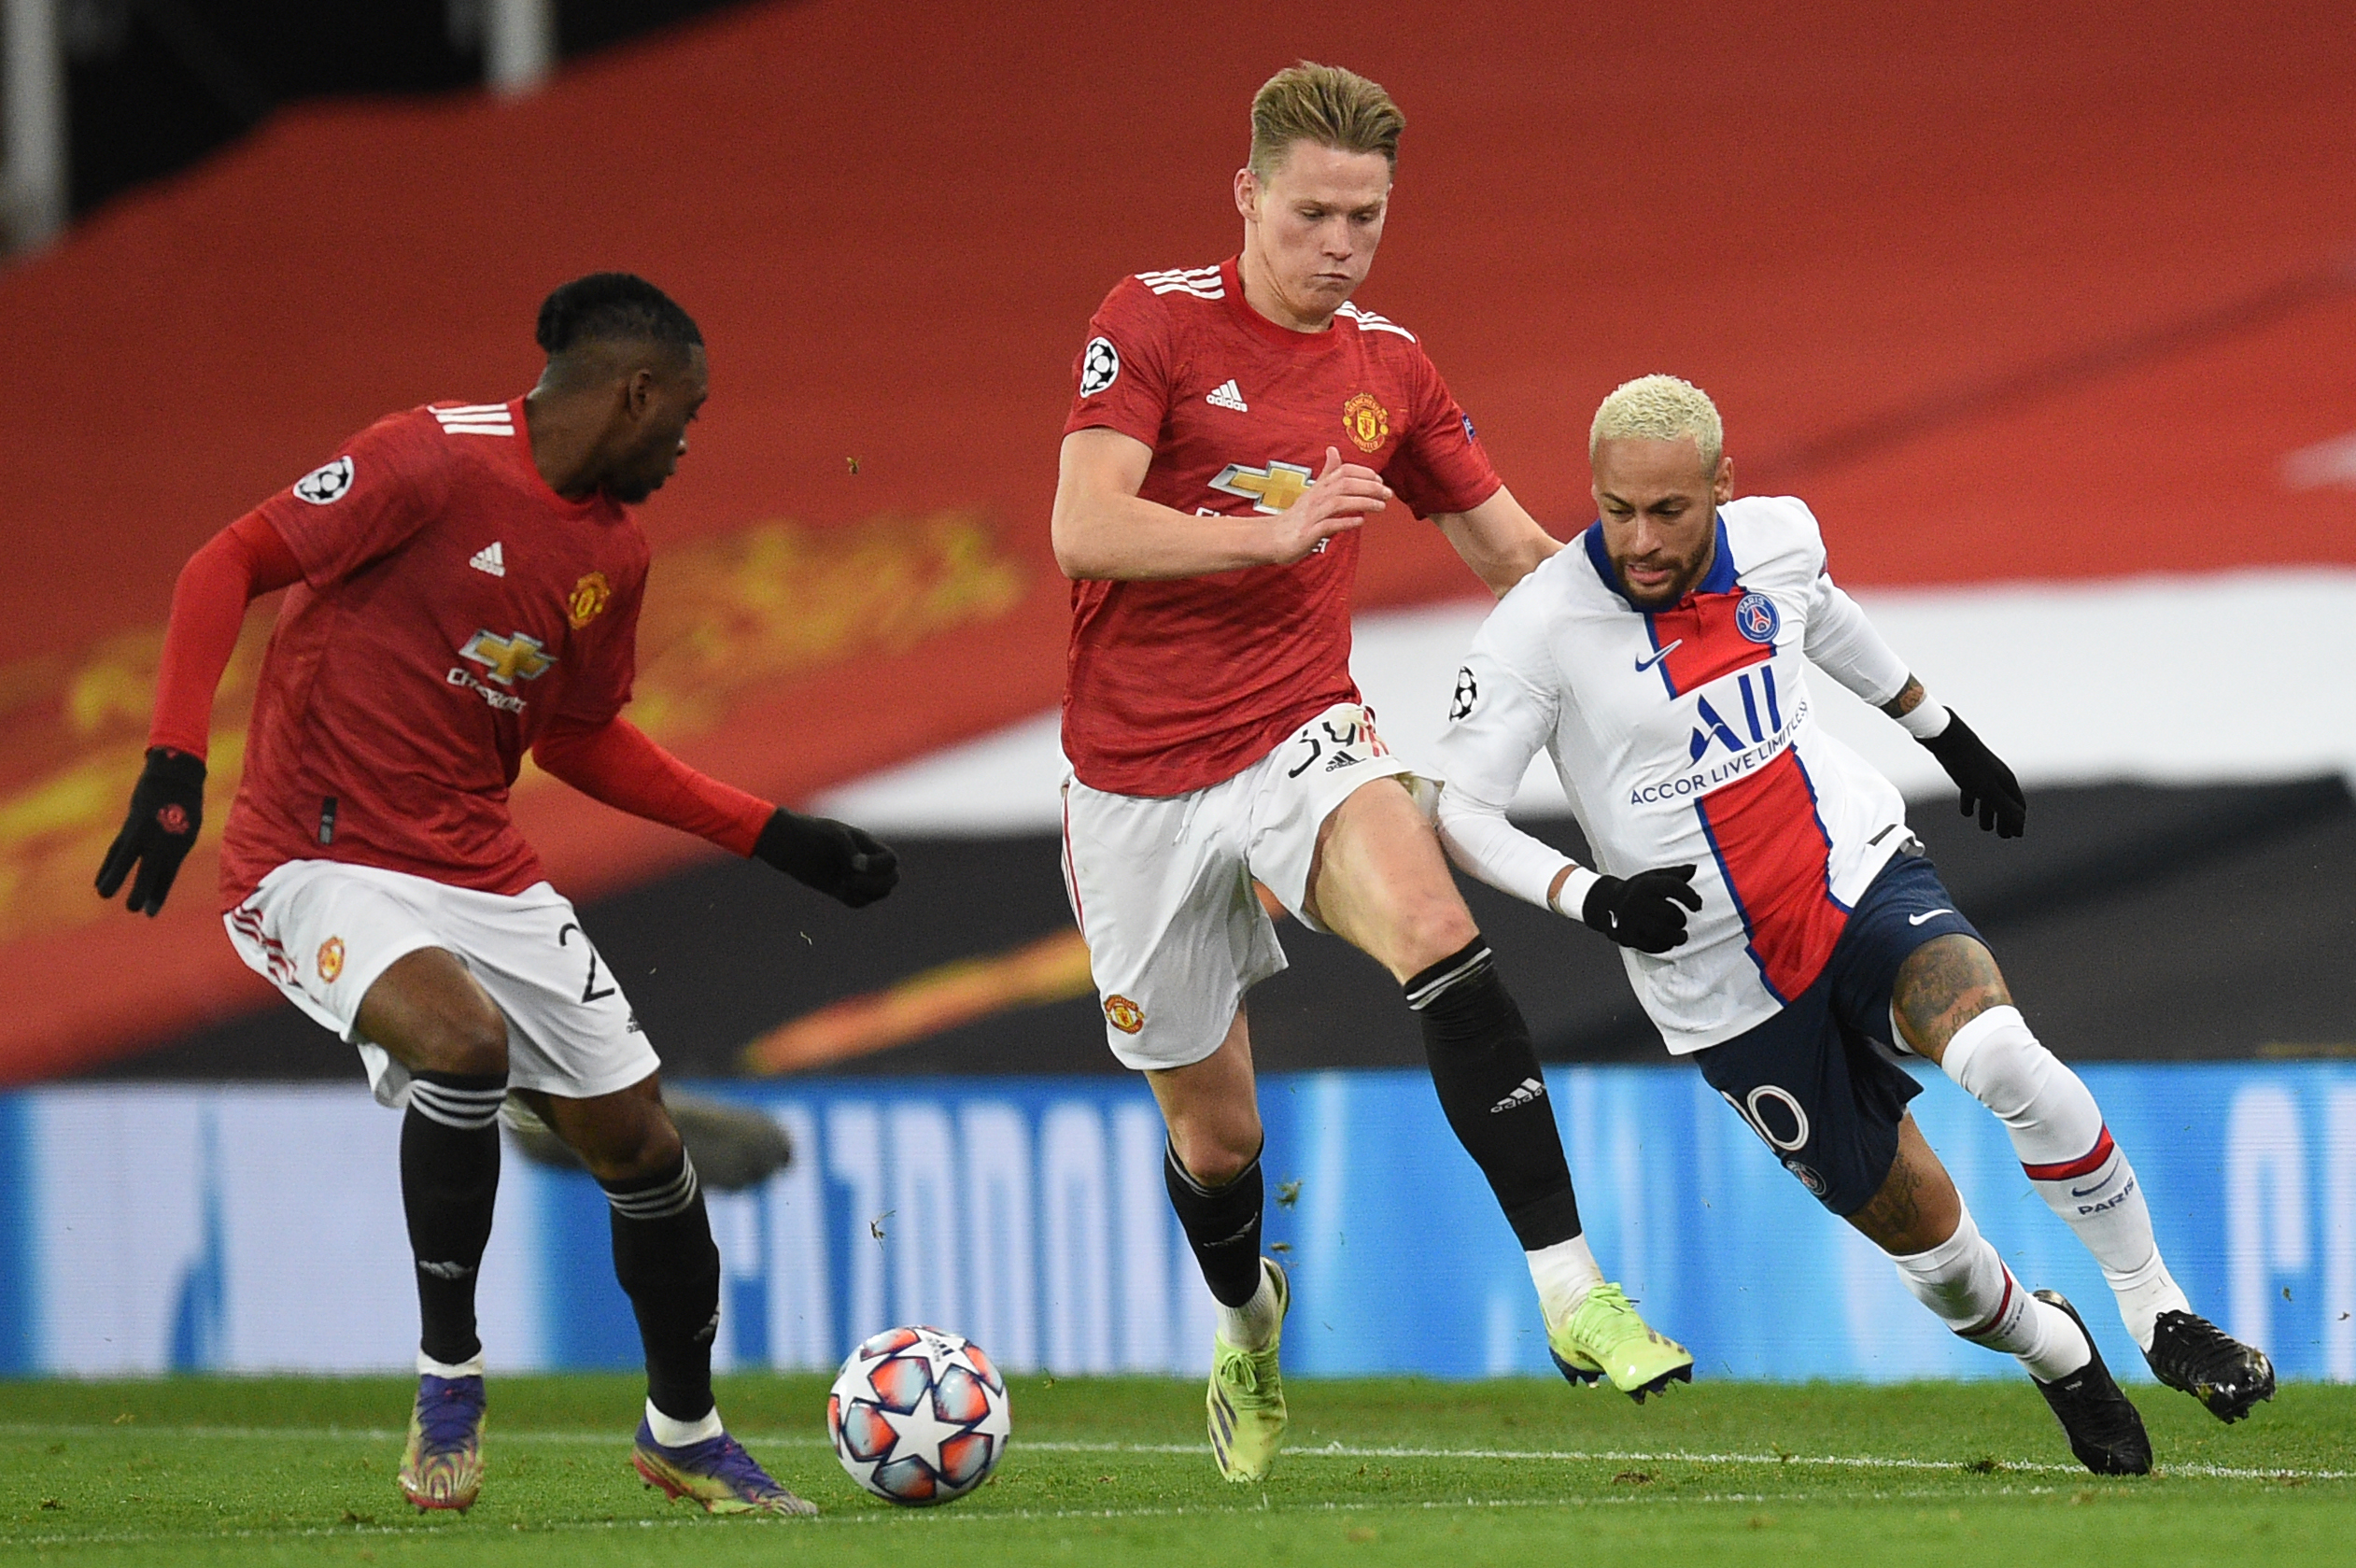 Scott McTominay has expressed his anger towards the theatrics of the PSG players and the quality of refereeing in their 1-3 loss at Old Trafford. (GETTY Images)